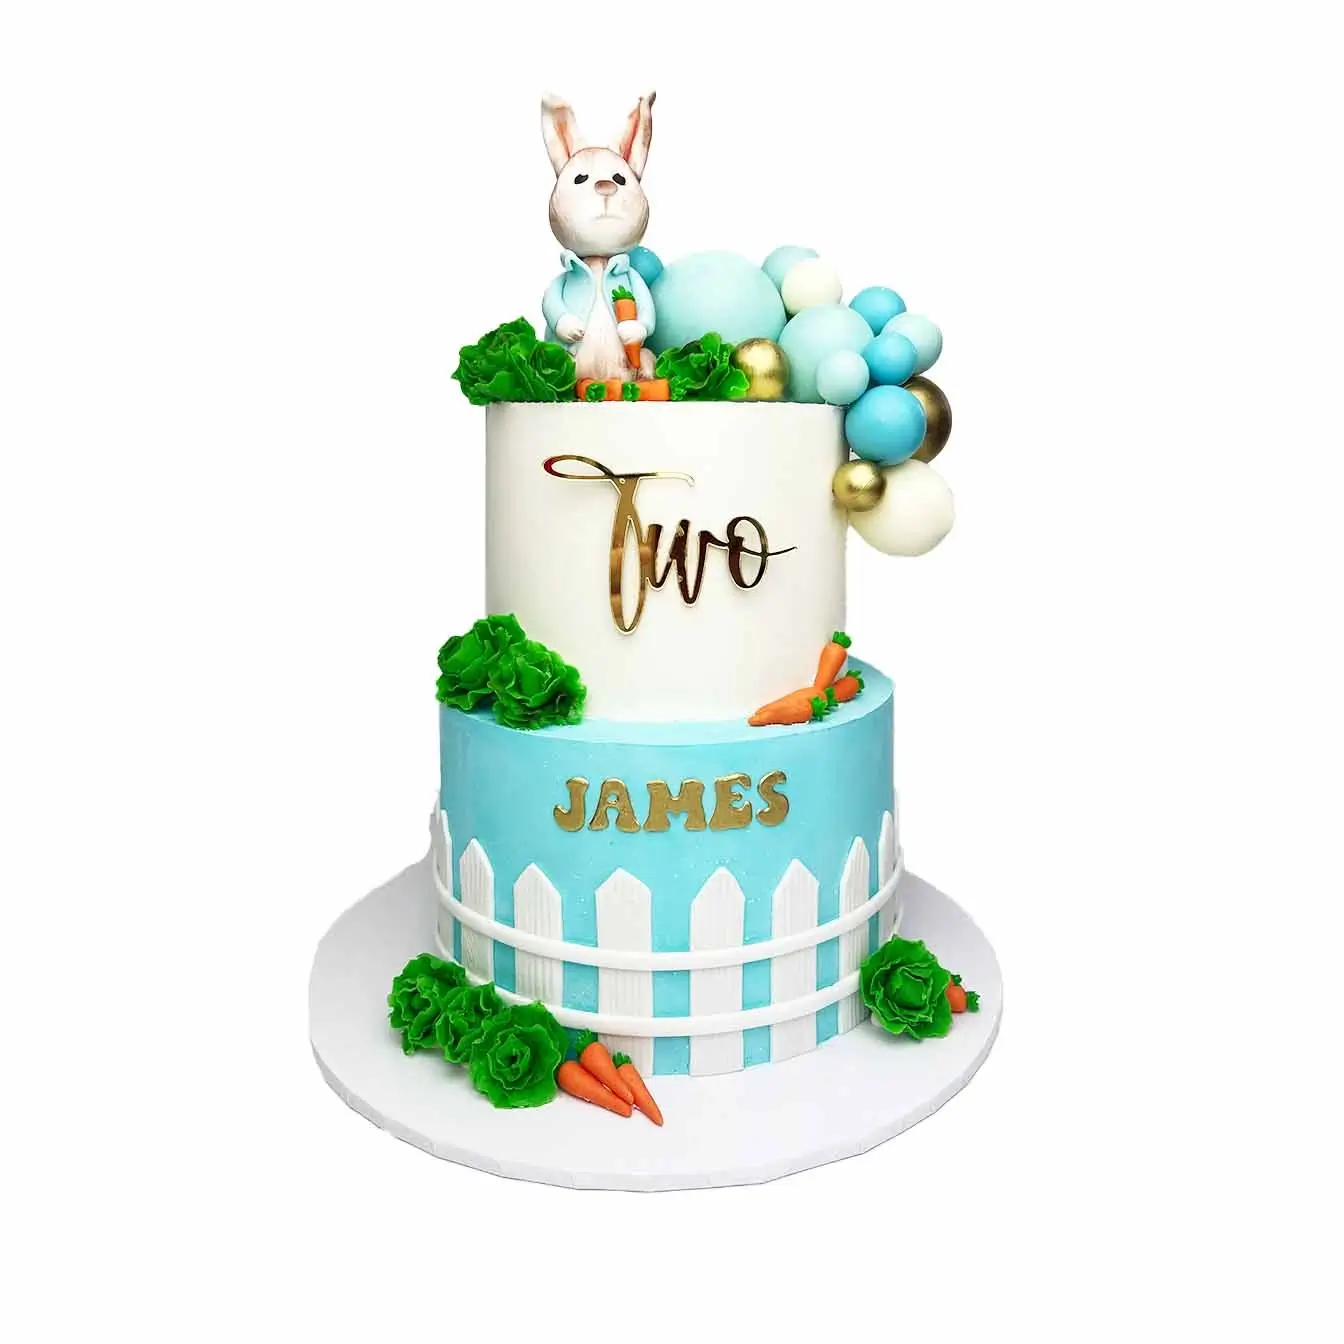 Whimsical Peter Rabbit Garden Cake - A two-tier cake with Peter Rabbit on top, molded carrots, cabbages, and a white picket fence, a flavorful centerpiece for baby showers and birthdays.